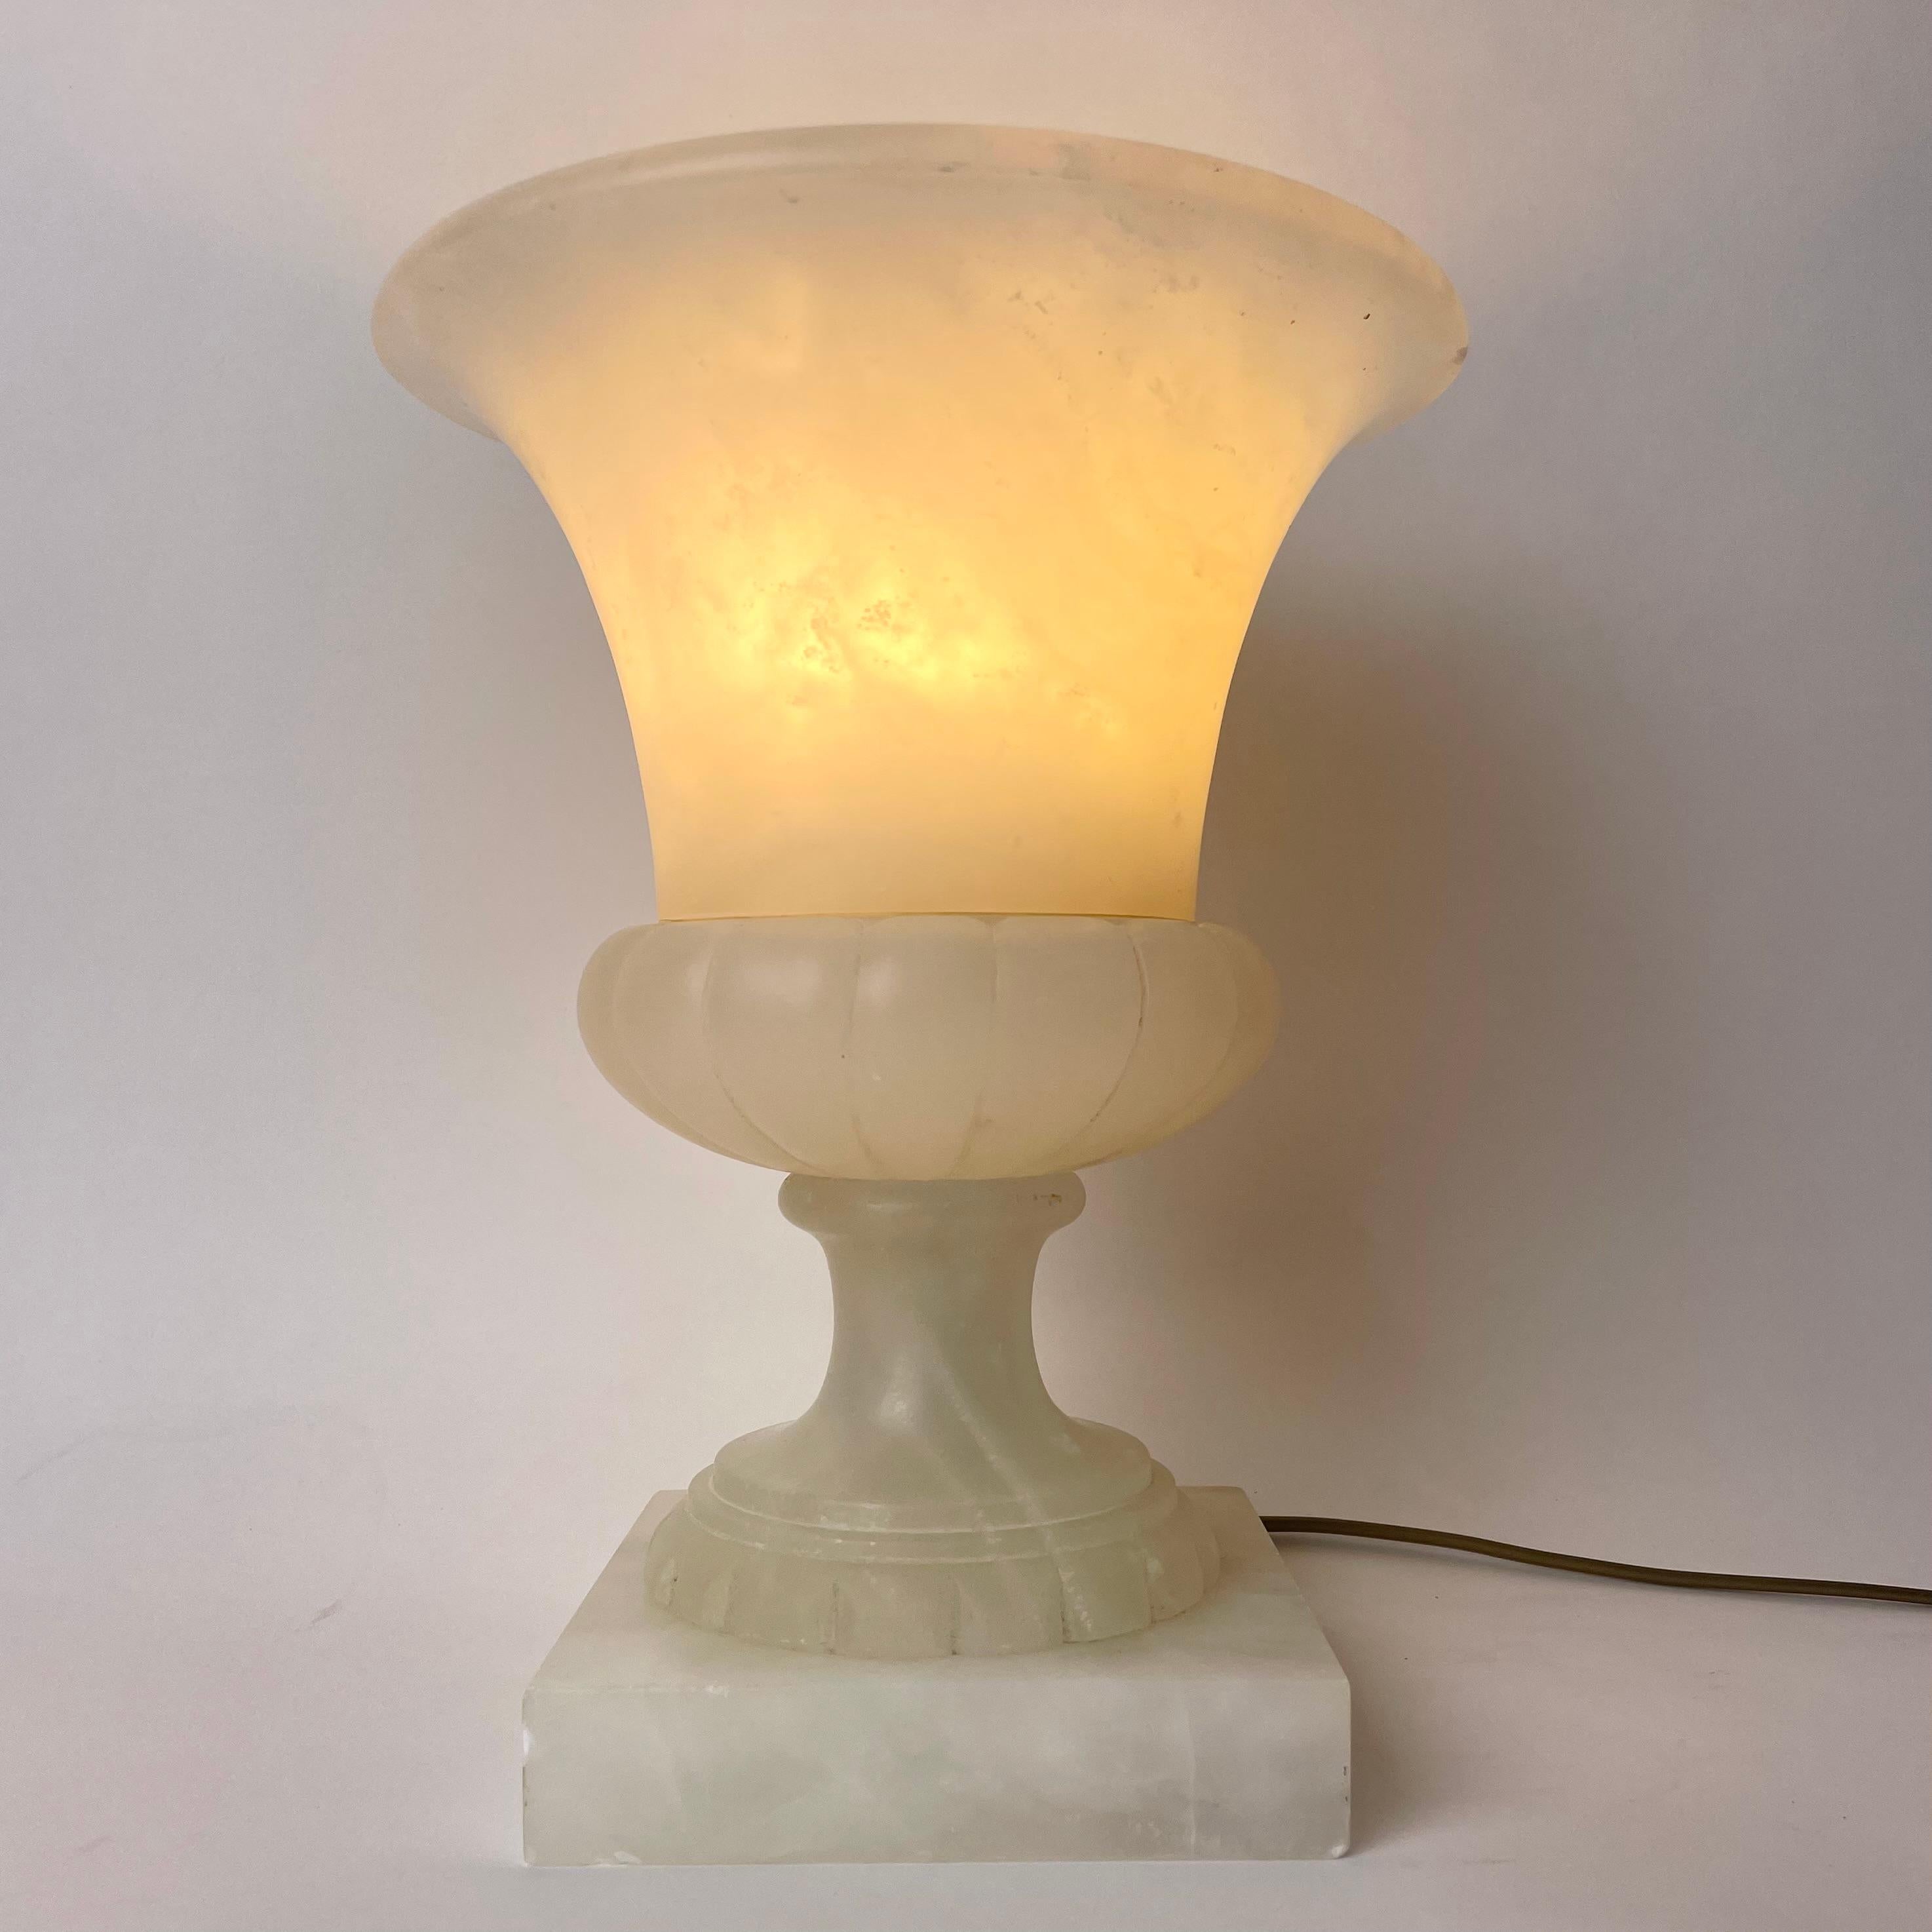 Elegant Urn-shaped Table Lamp in Alabaster probably from the early 20th Century. Very warm and cozy light. 

The back of the lamp has smaller dots from before for warm lamps. (See pictures)

Wear consistent with age and use 